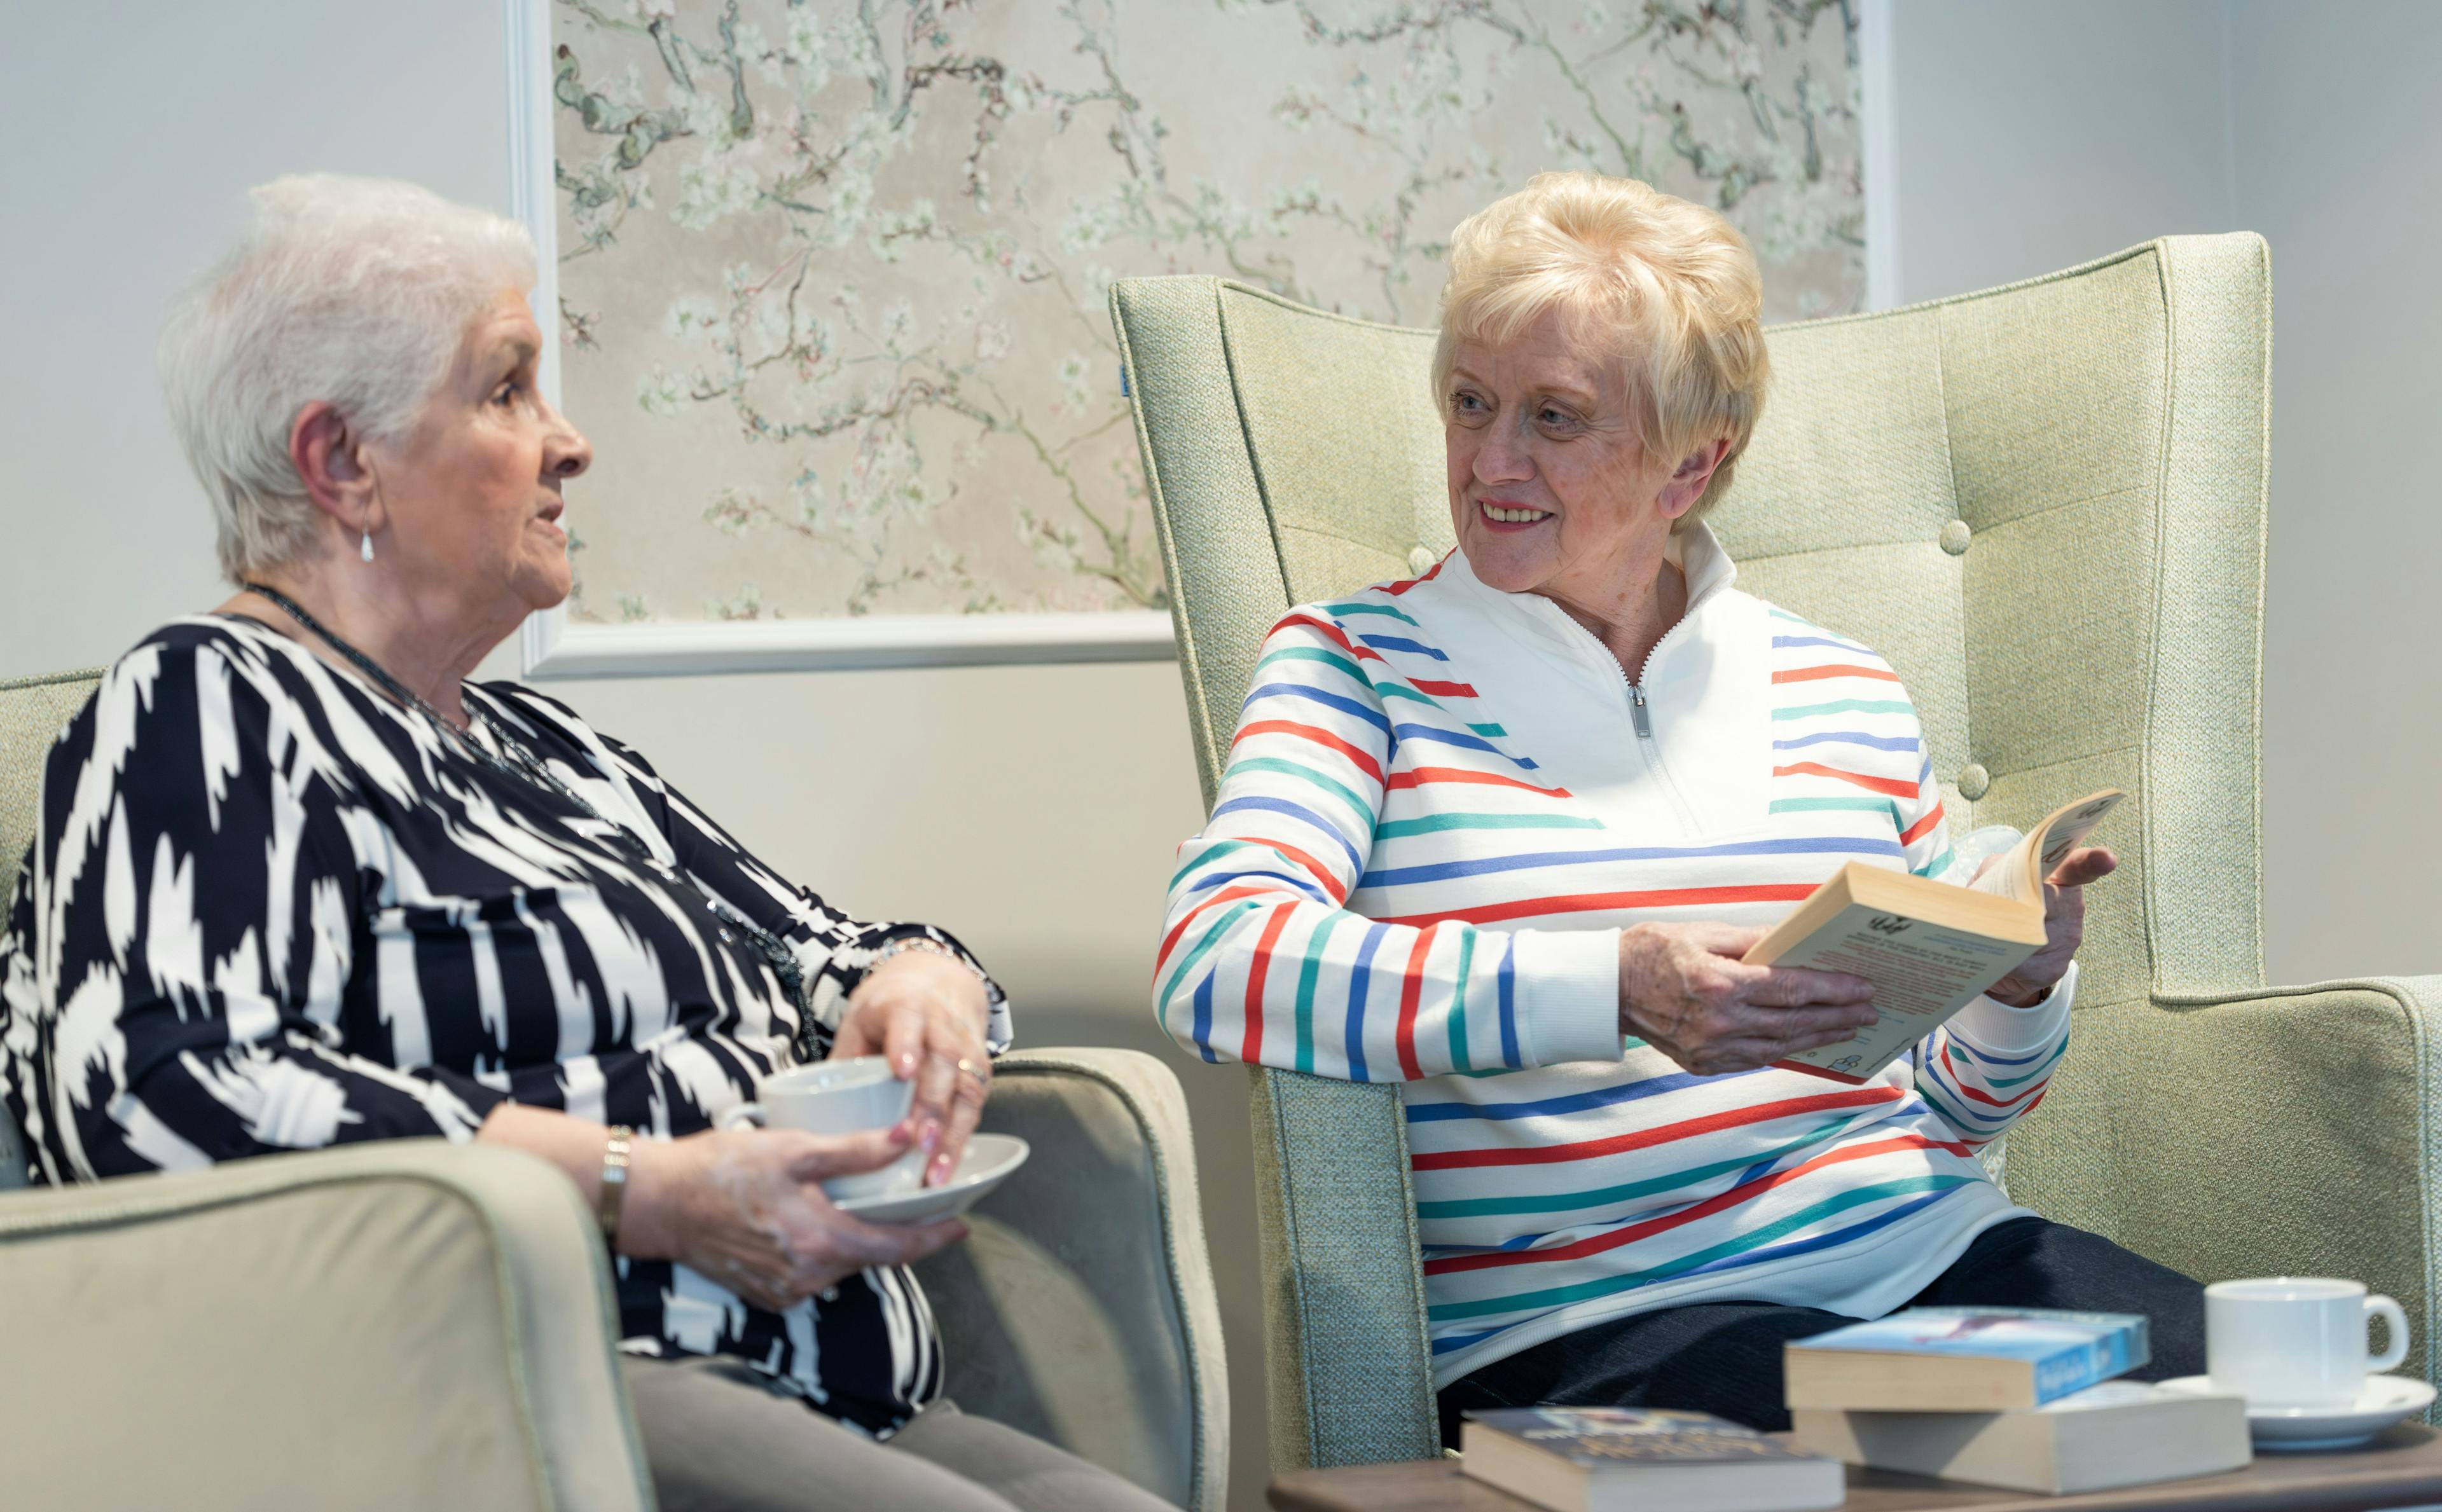 Residents of Astley View care home in Chorley